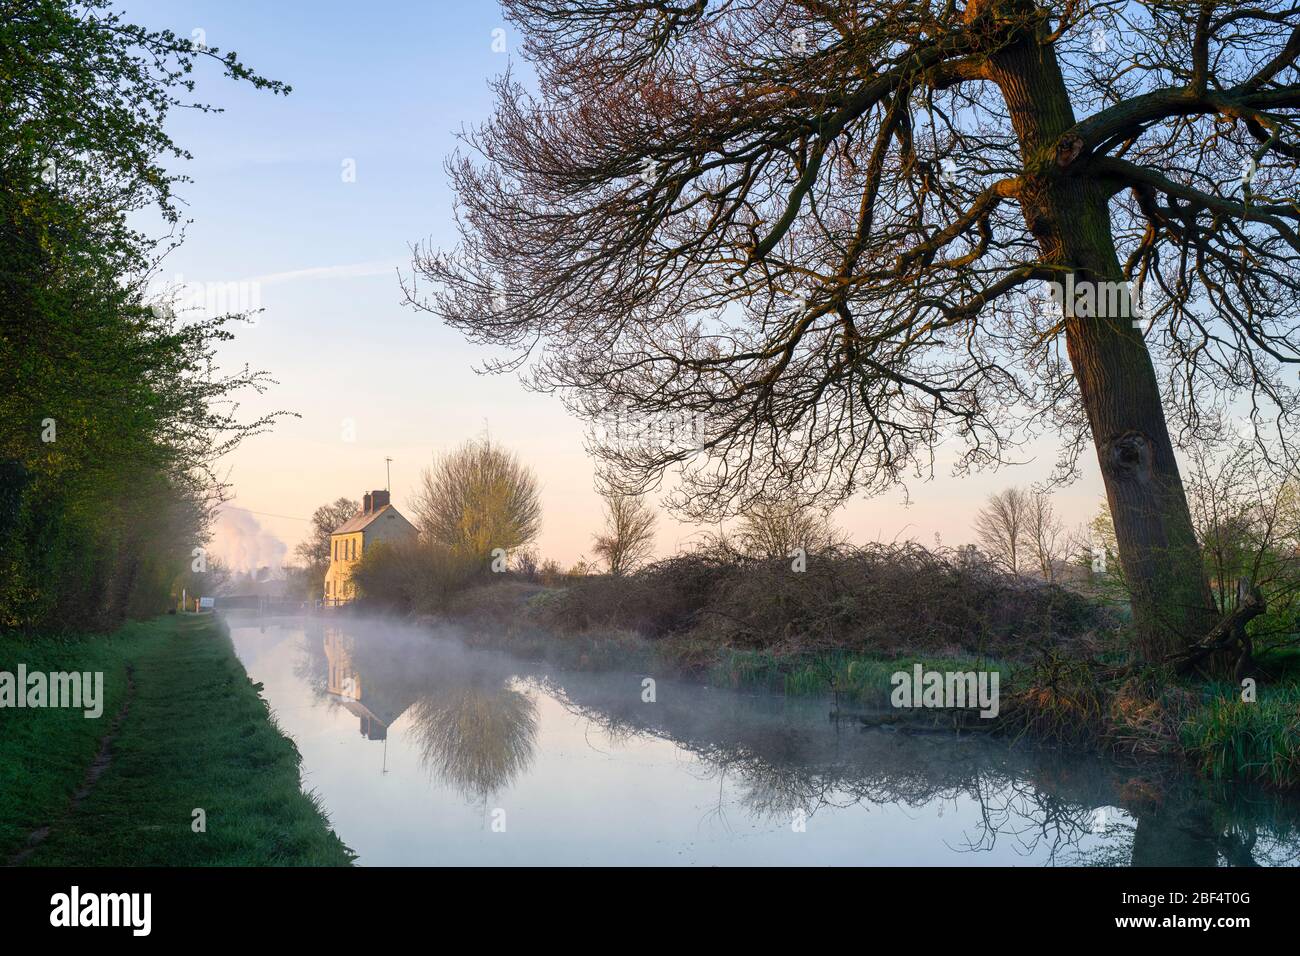 Derelict Lock Keepers cottage on the oxford canal on a spring morning at sunrise. Near Kings Sutton, Oxfordshire / Northamptonshire border, England Stock Photo